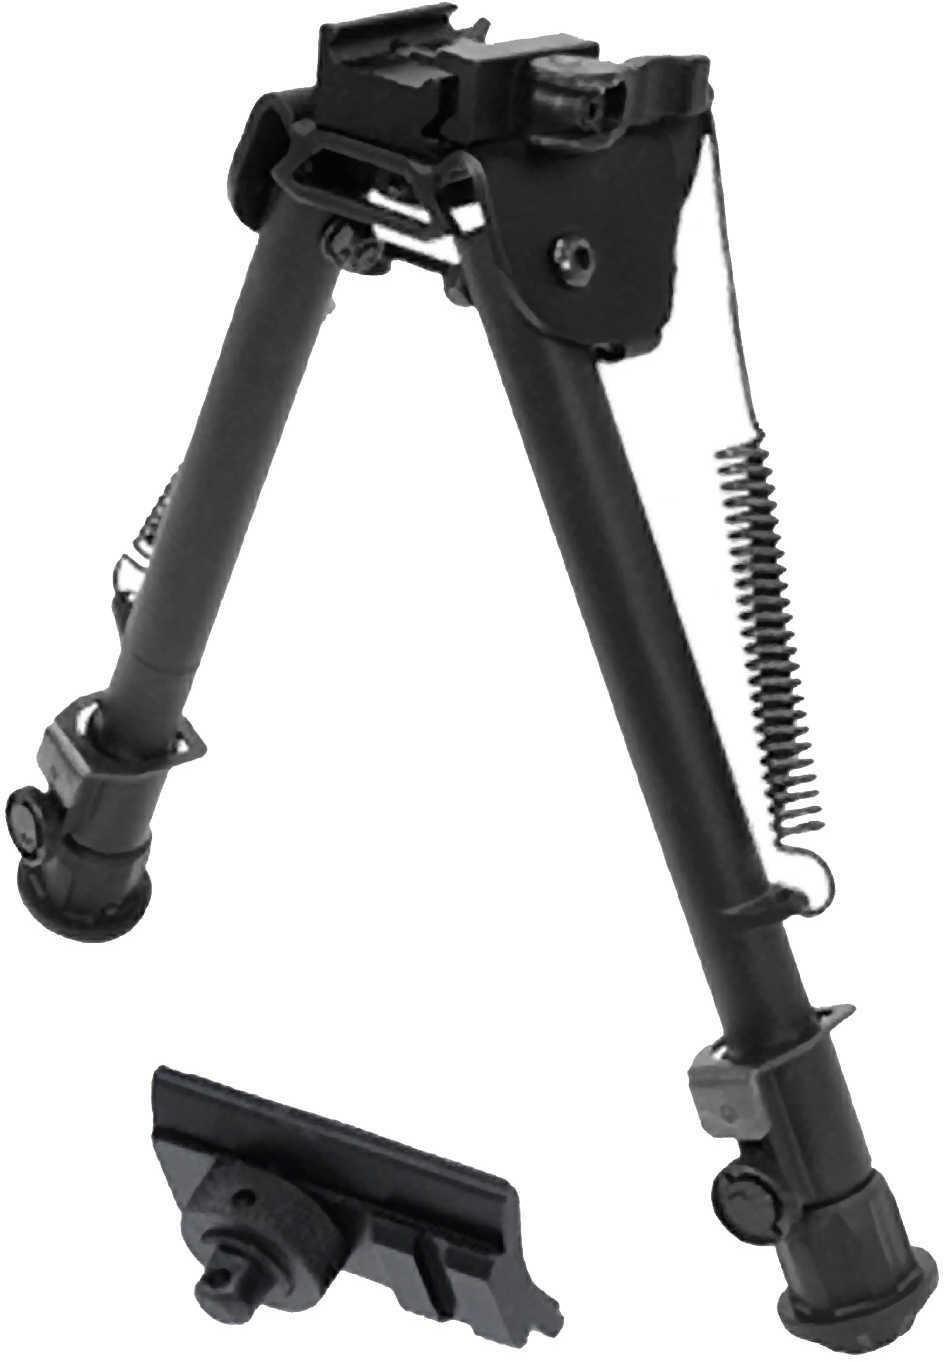 Leapers UTG Tl-BP88Q Tactical Op Bipod With QD Lever Mount Black Metal 8-12.4"